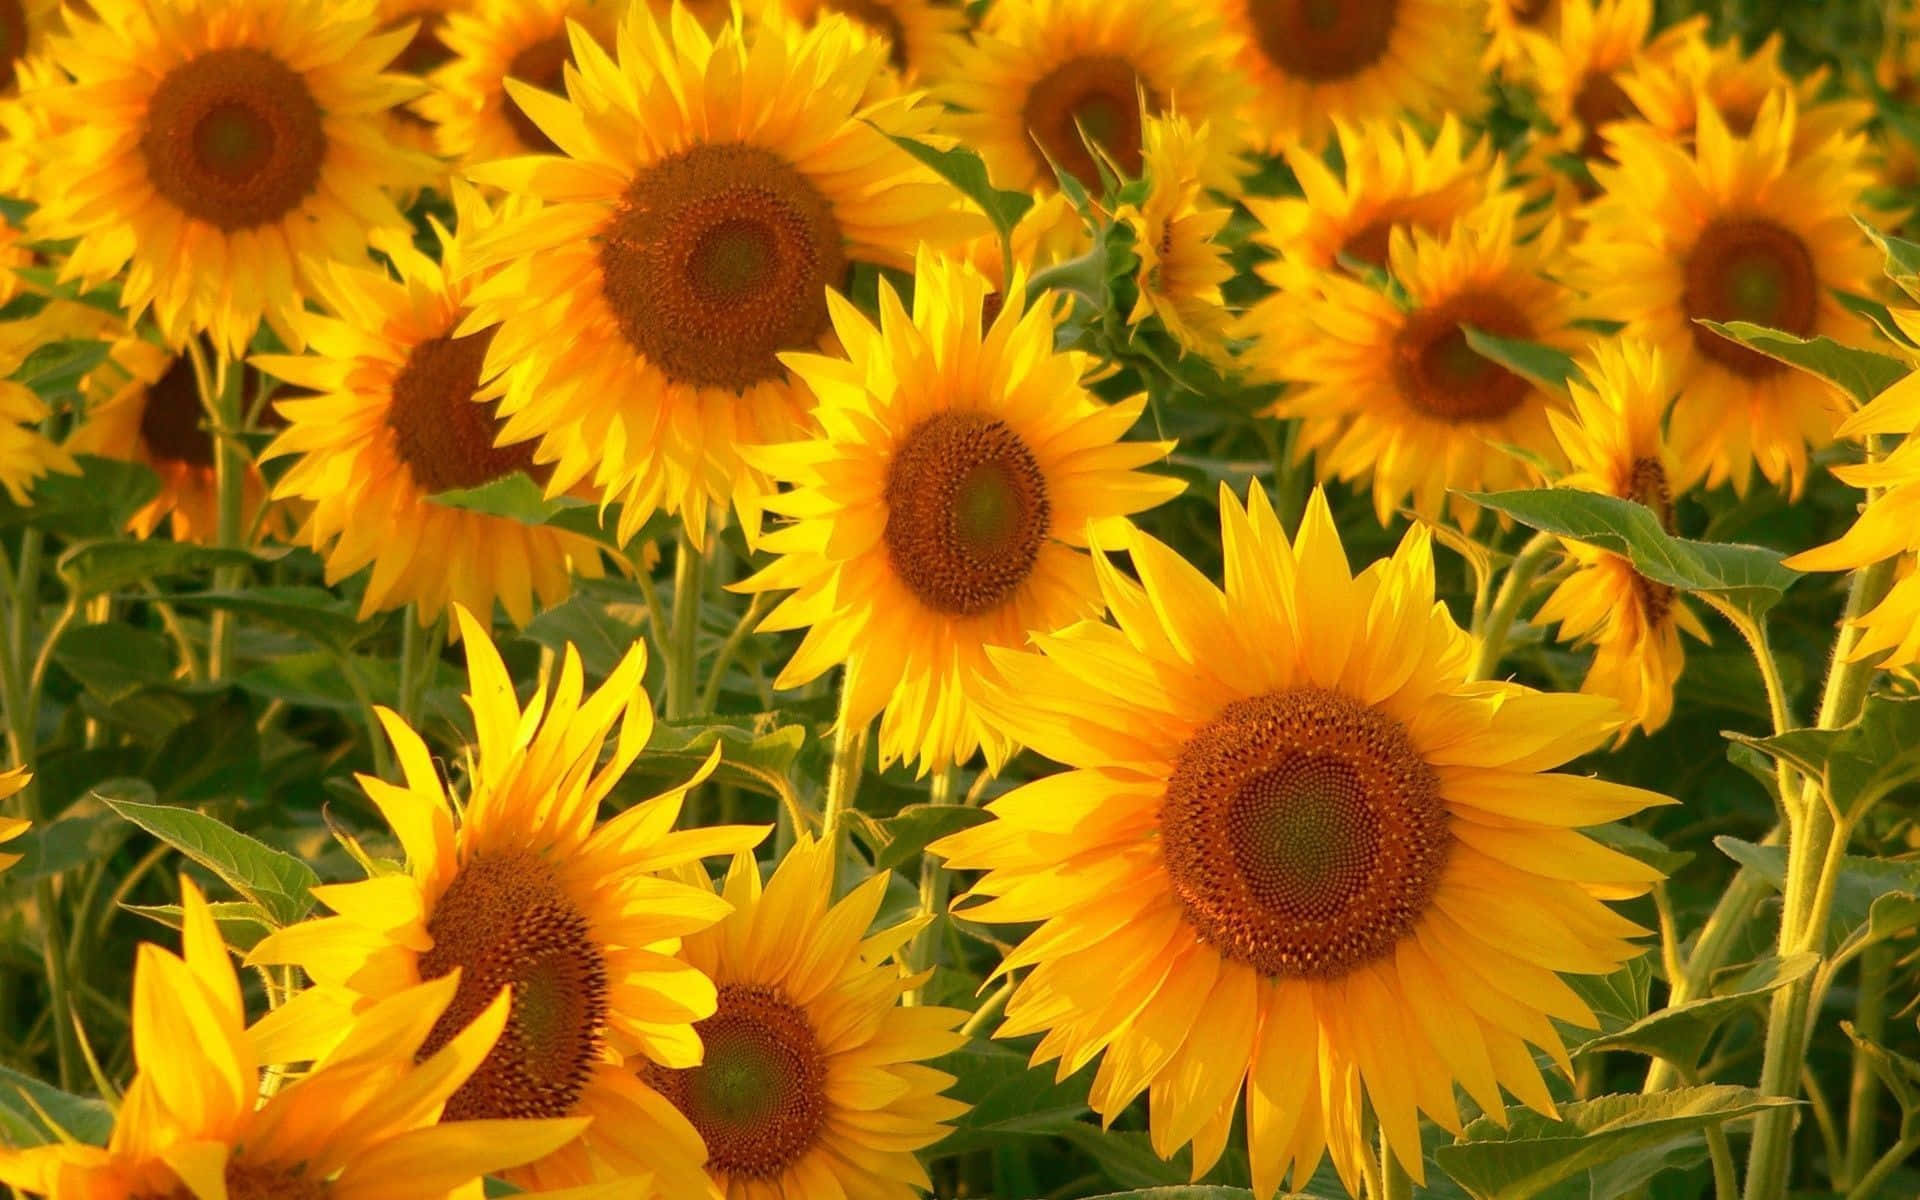 a field of sunflowers with many bright yellow flowers